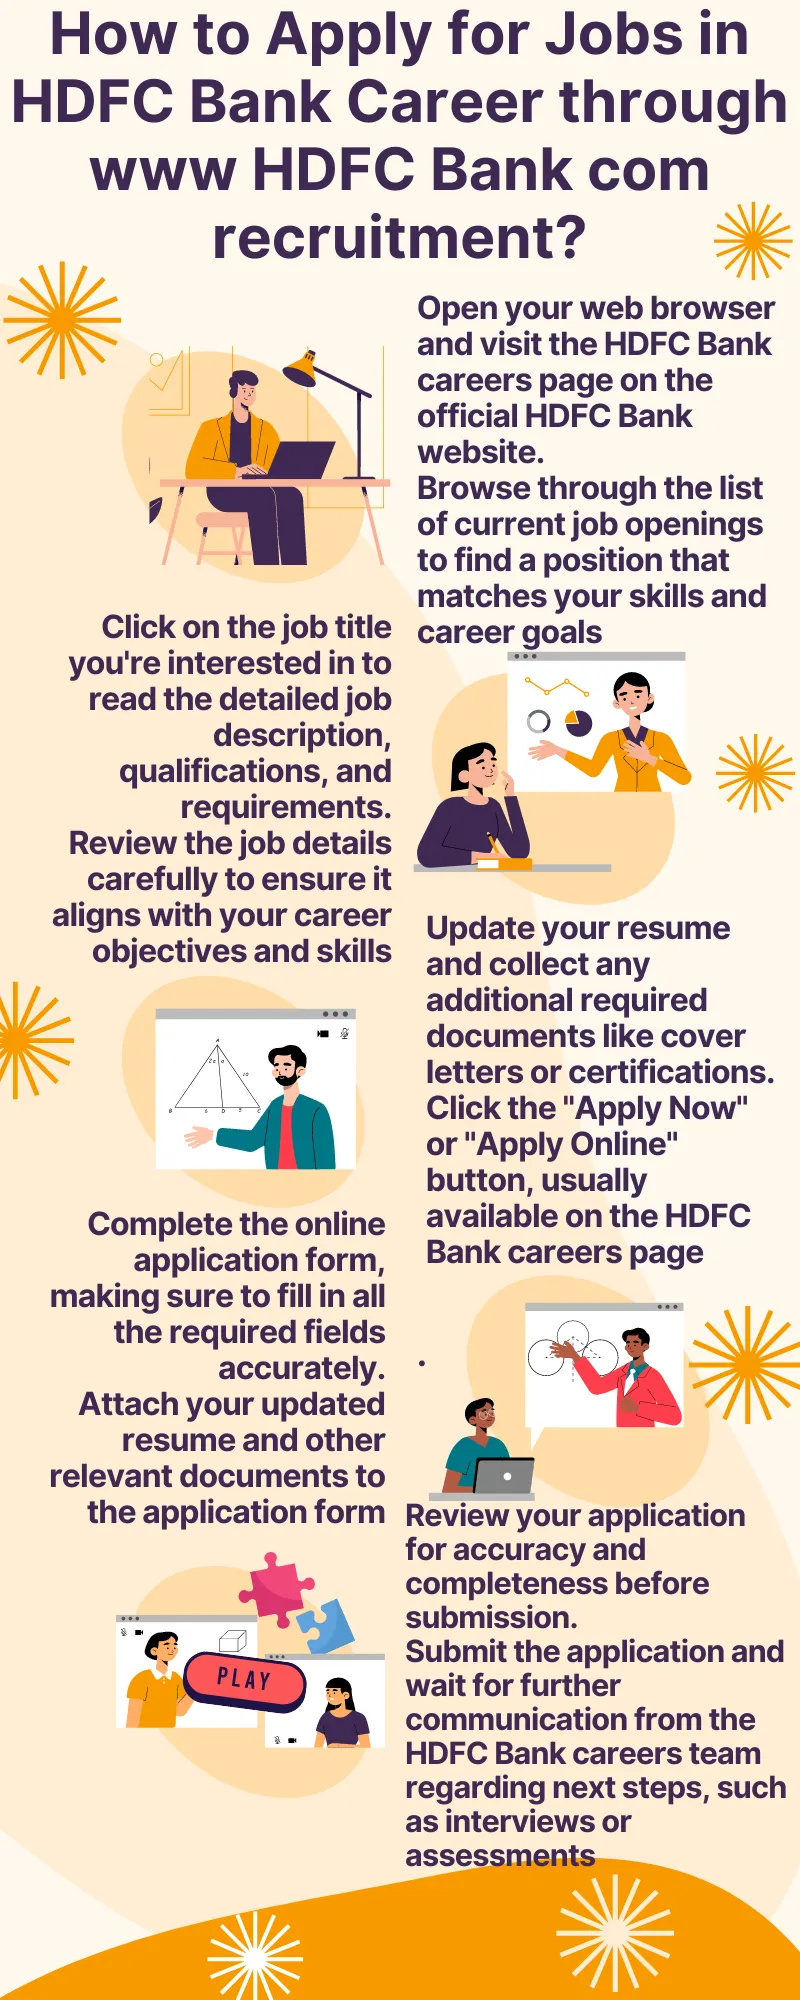 How to Apply for Jobs in HDFC Bank Career through www HDFC Bank com recruitment?